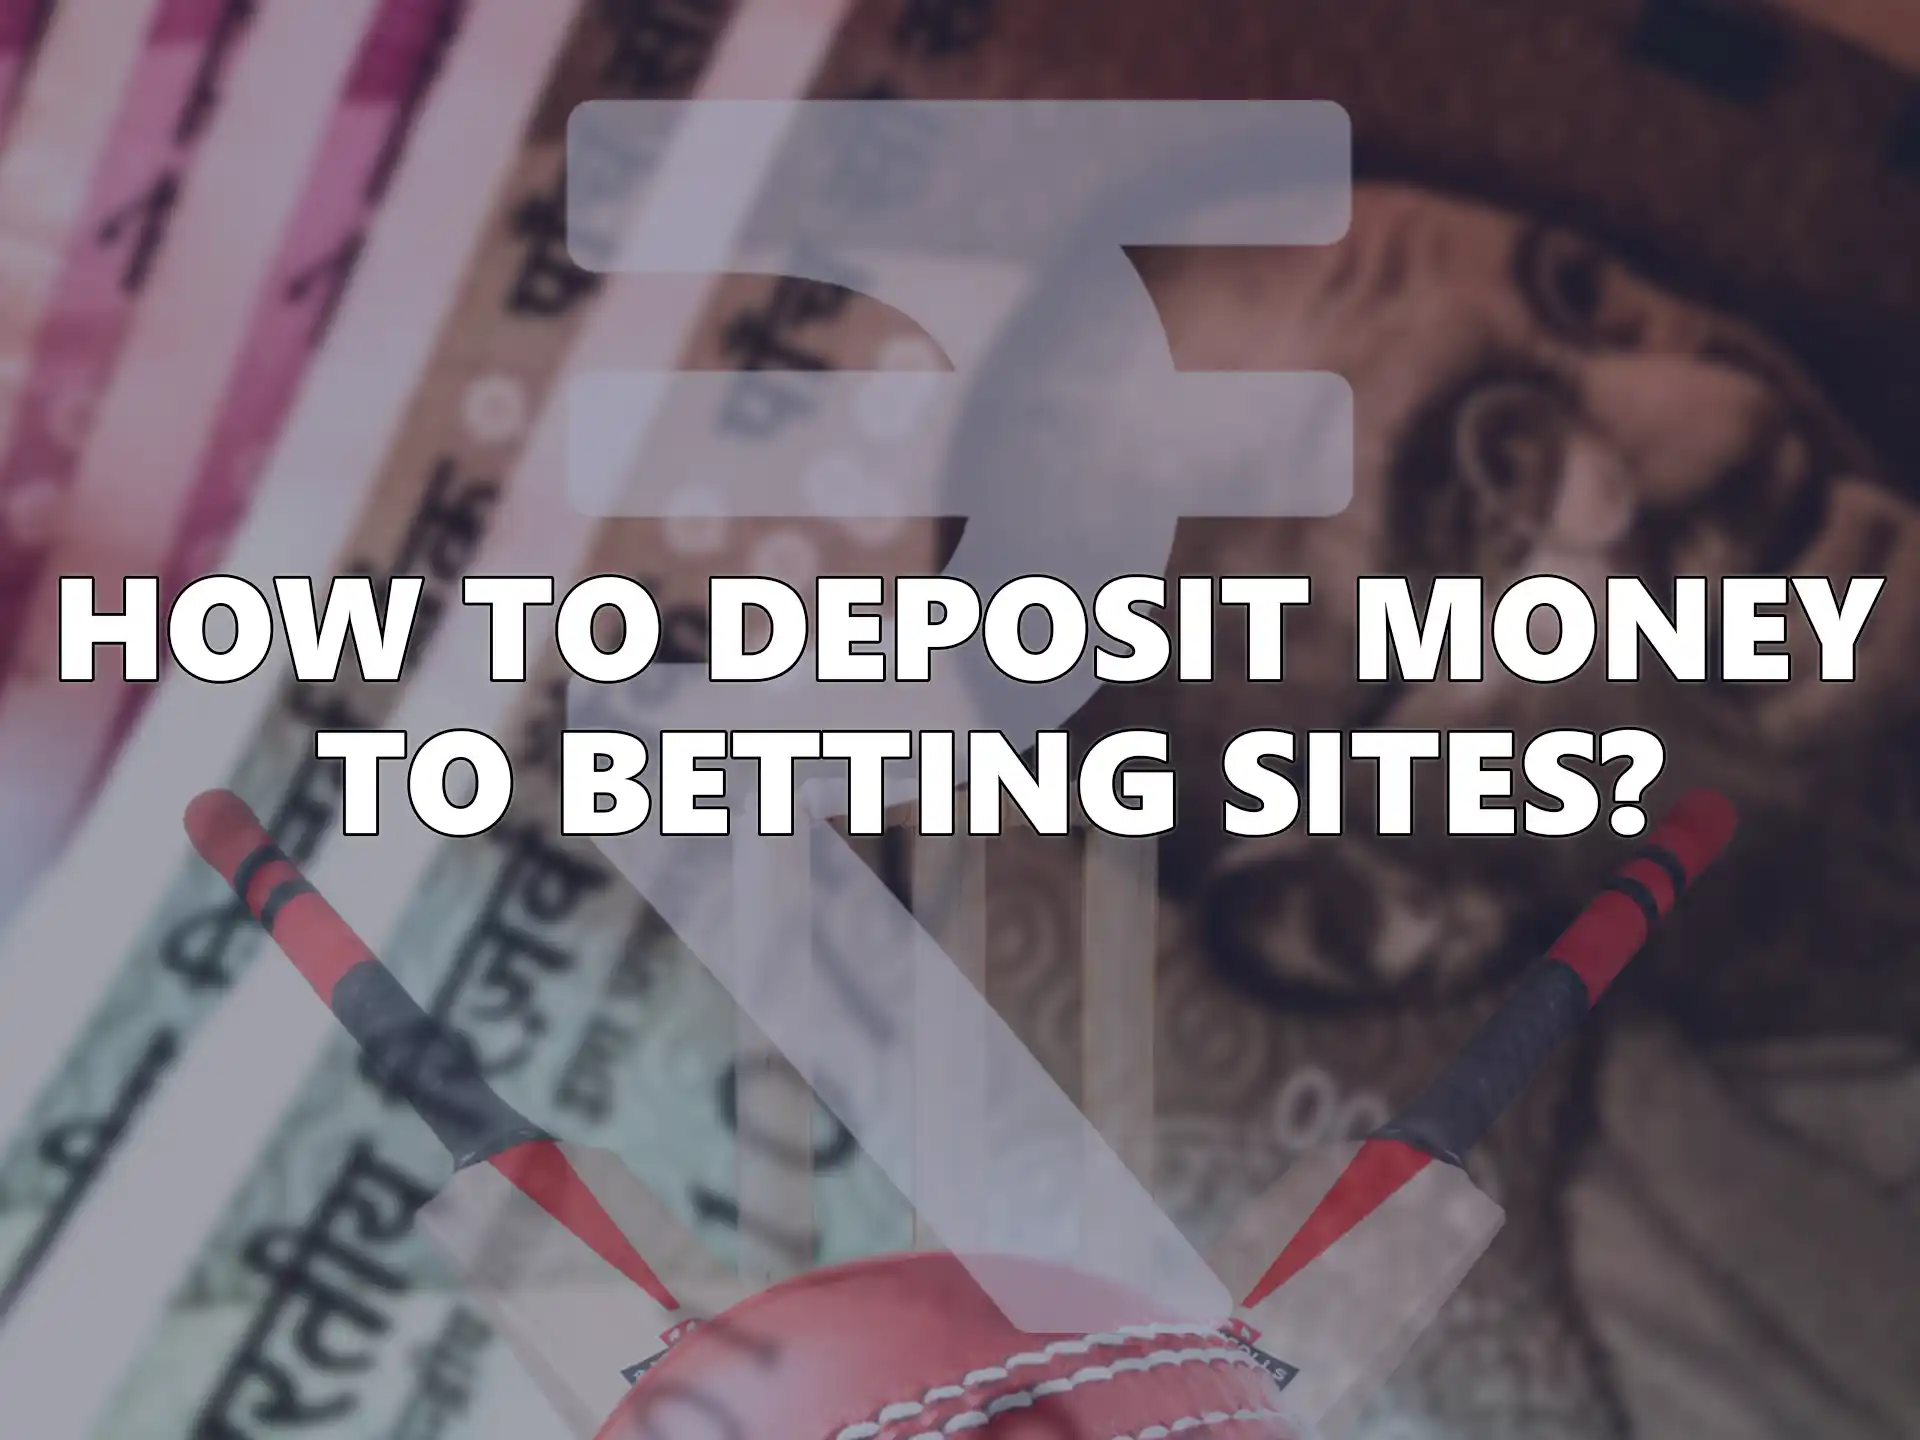 Each bettor starts the game by replenishing the account using payment systems, our detailed guide will tell you how to do this.